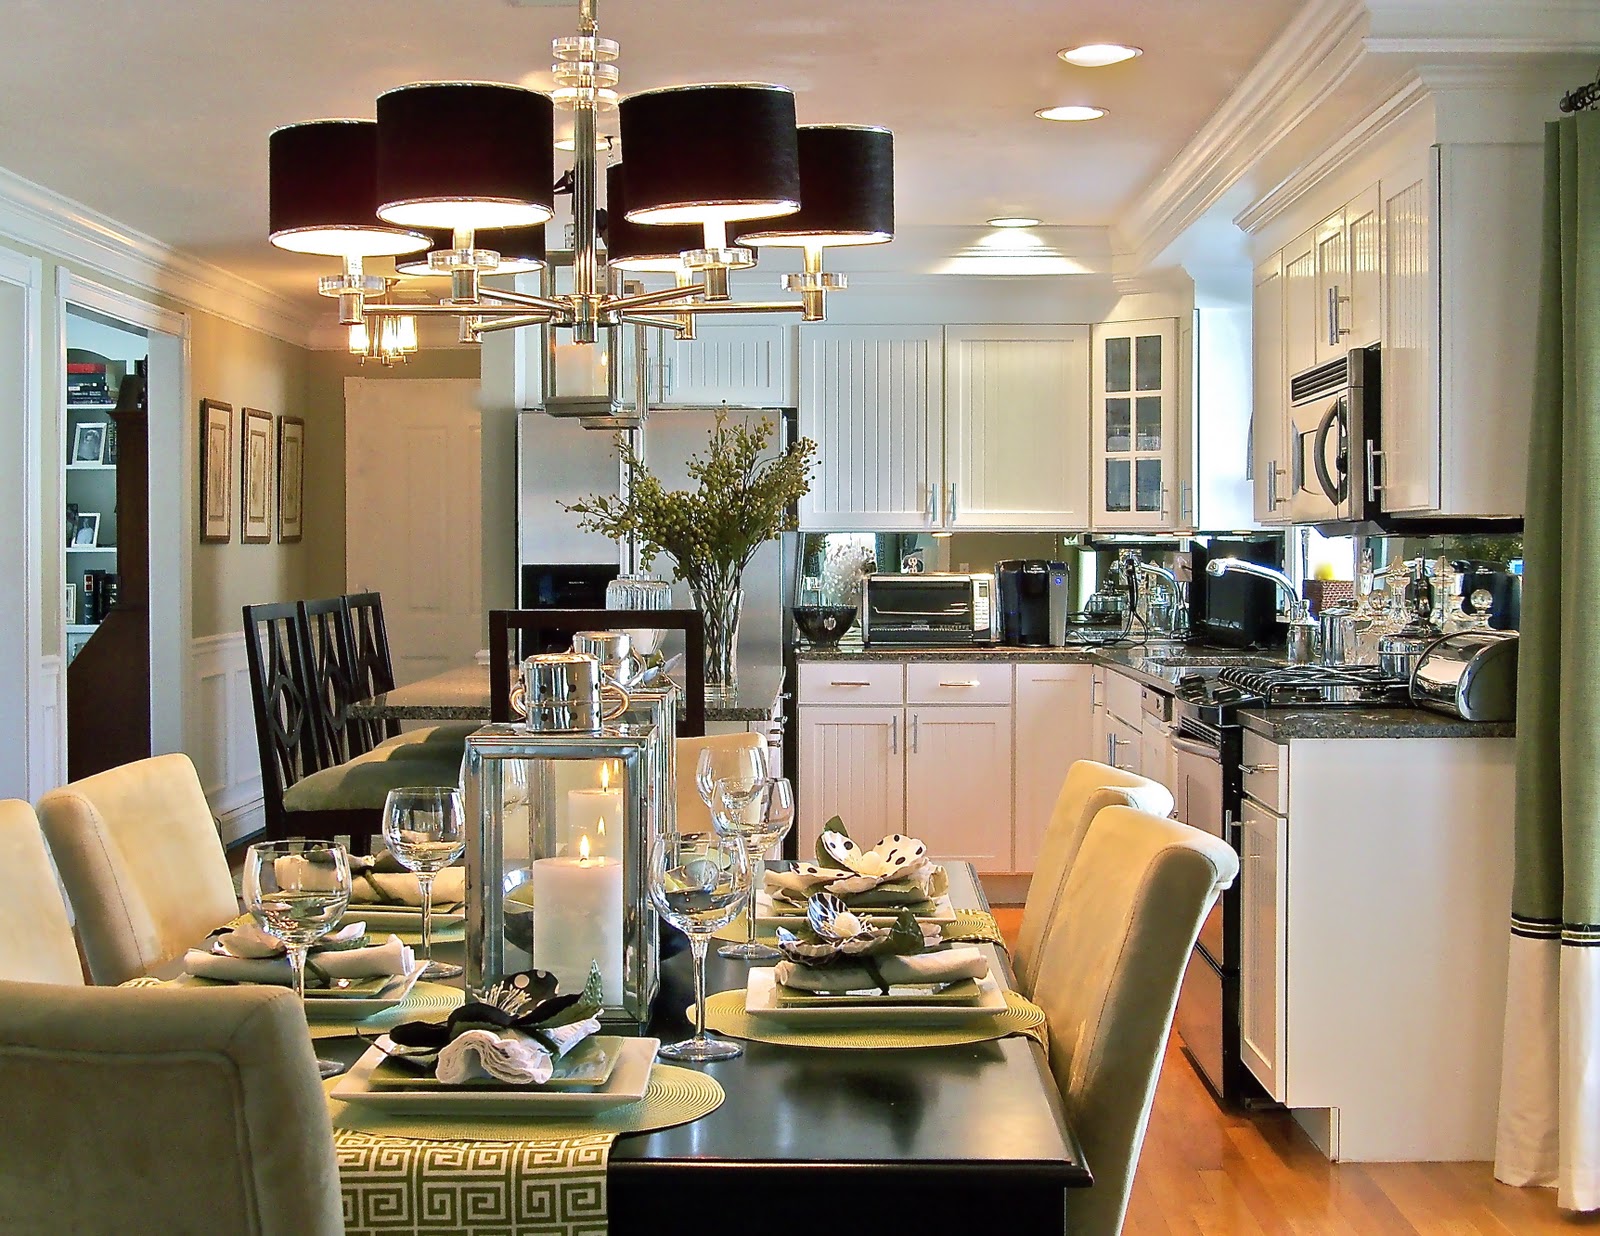 Your Kitchen and Dining Area